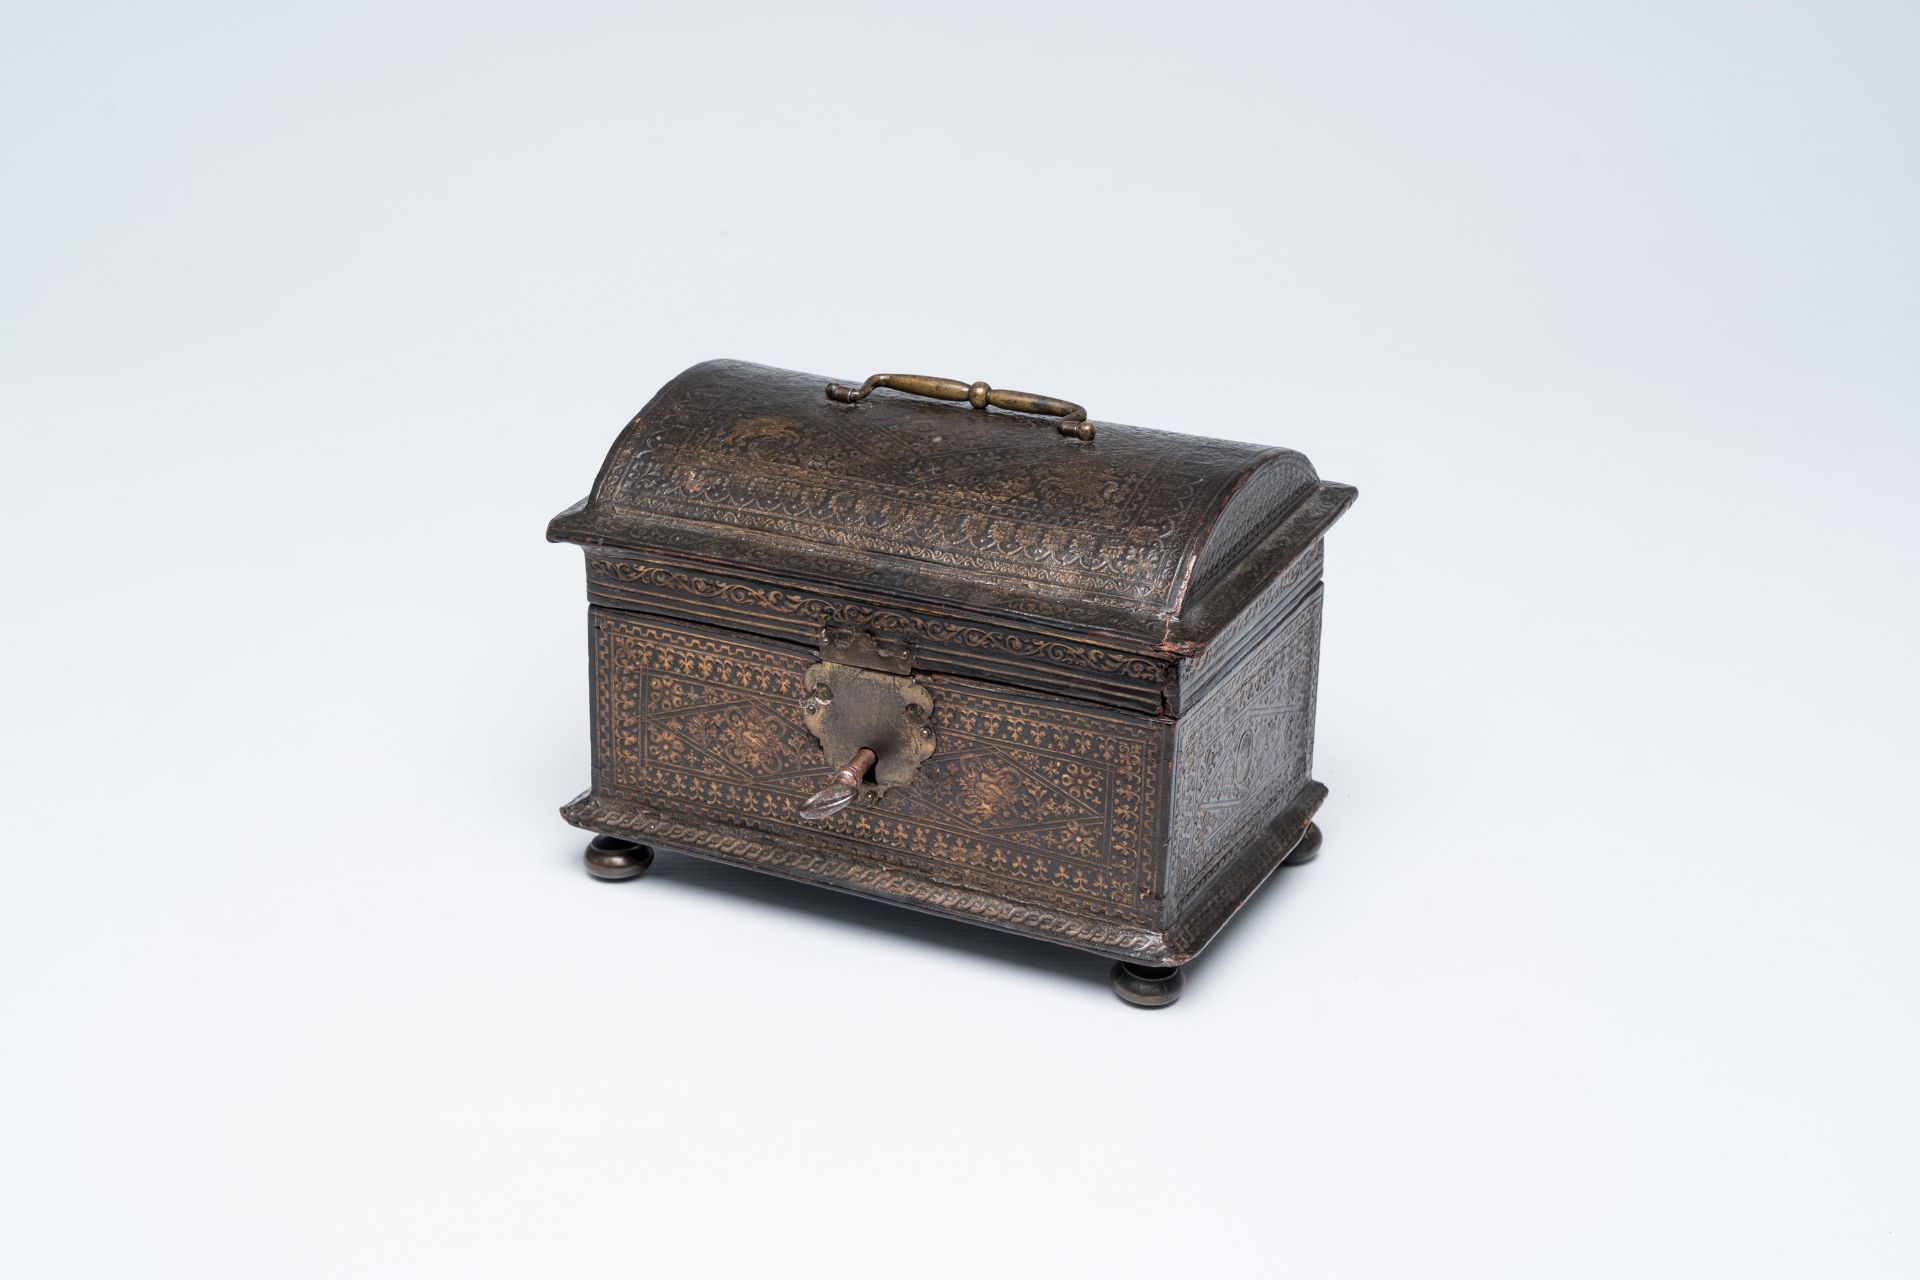 An Antwerp 'Plantijn' gilt embossed leather wood wedding chest, first third 17th C.